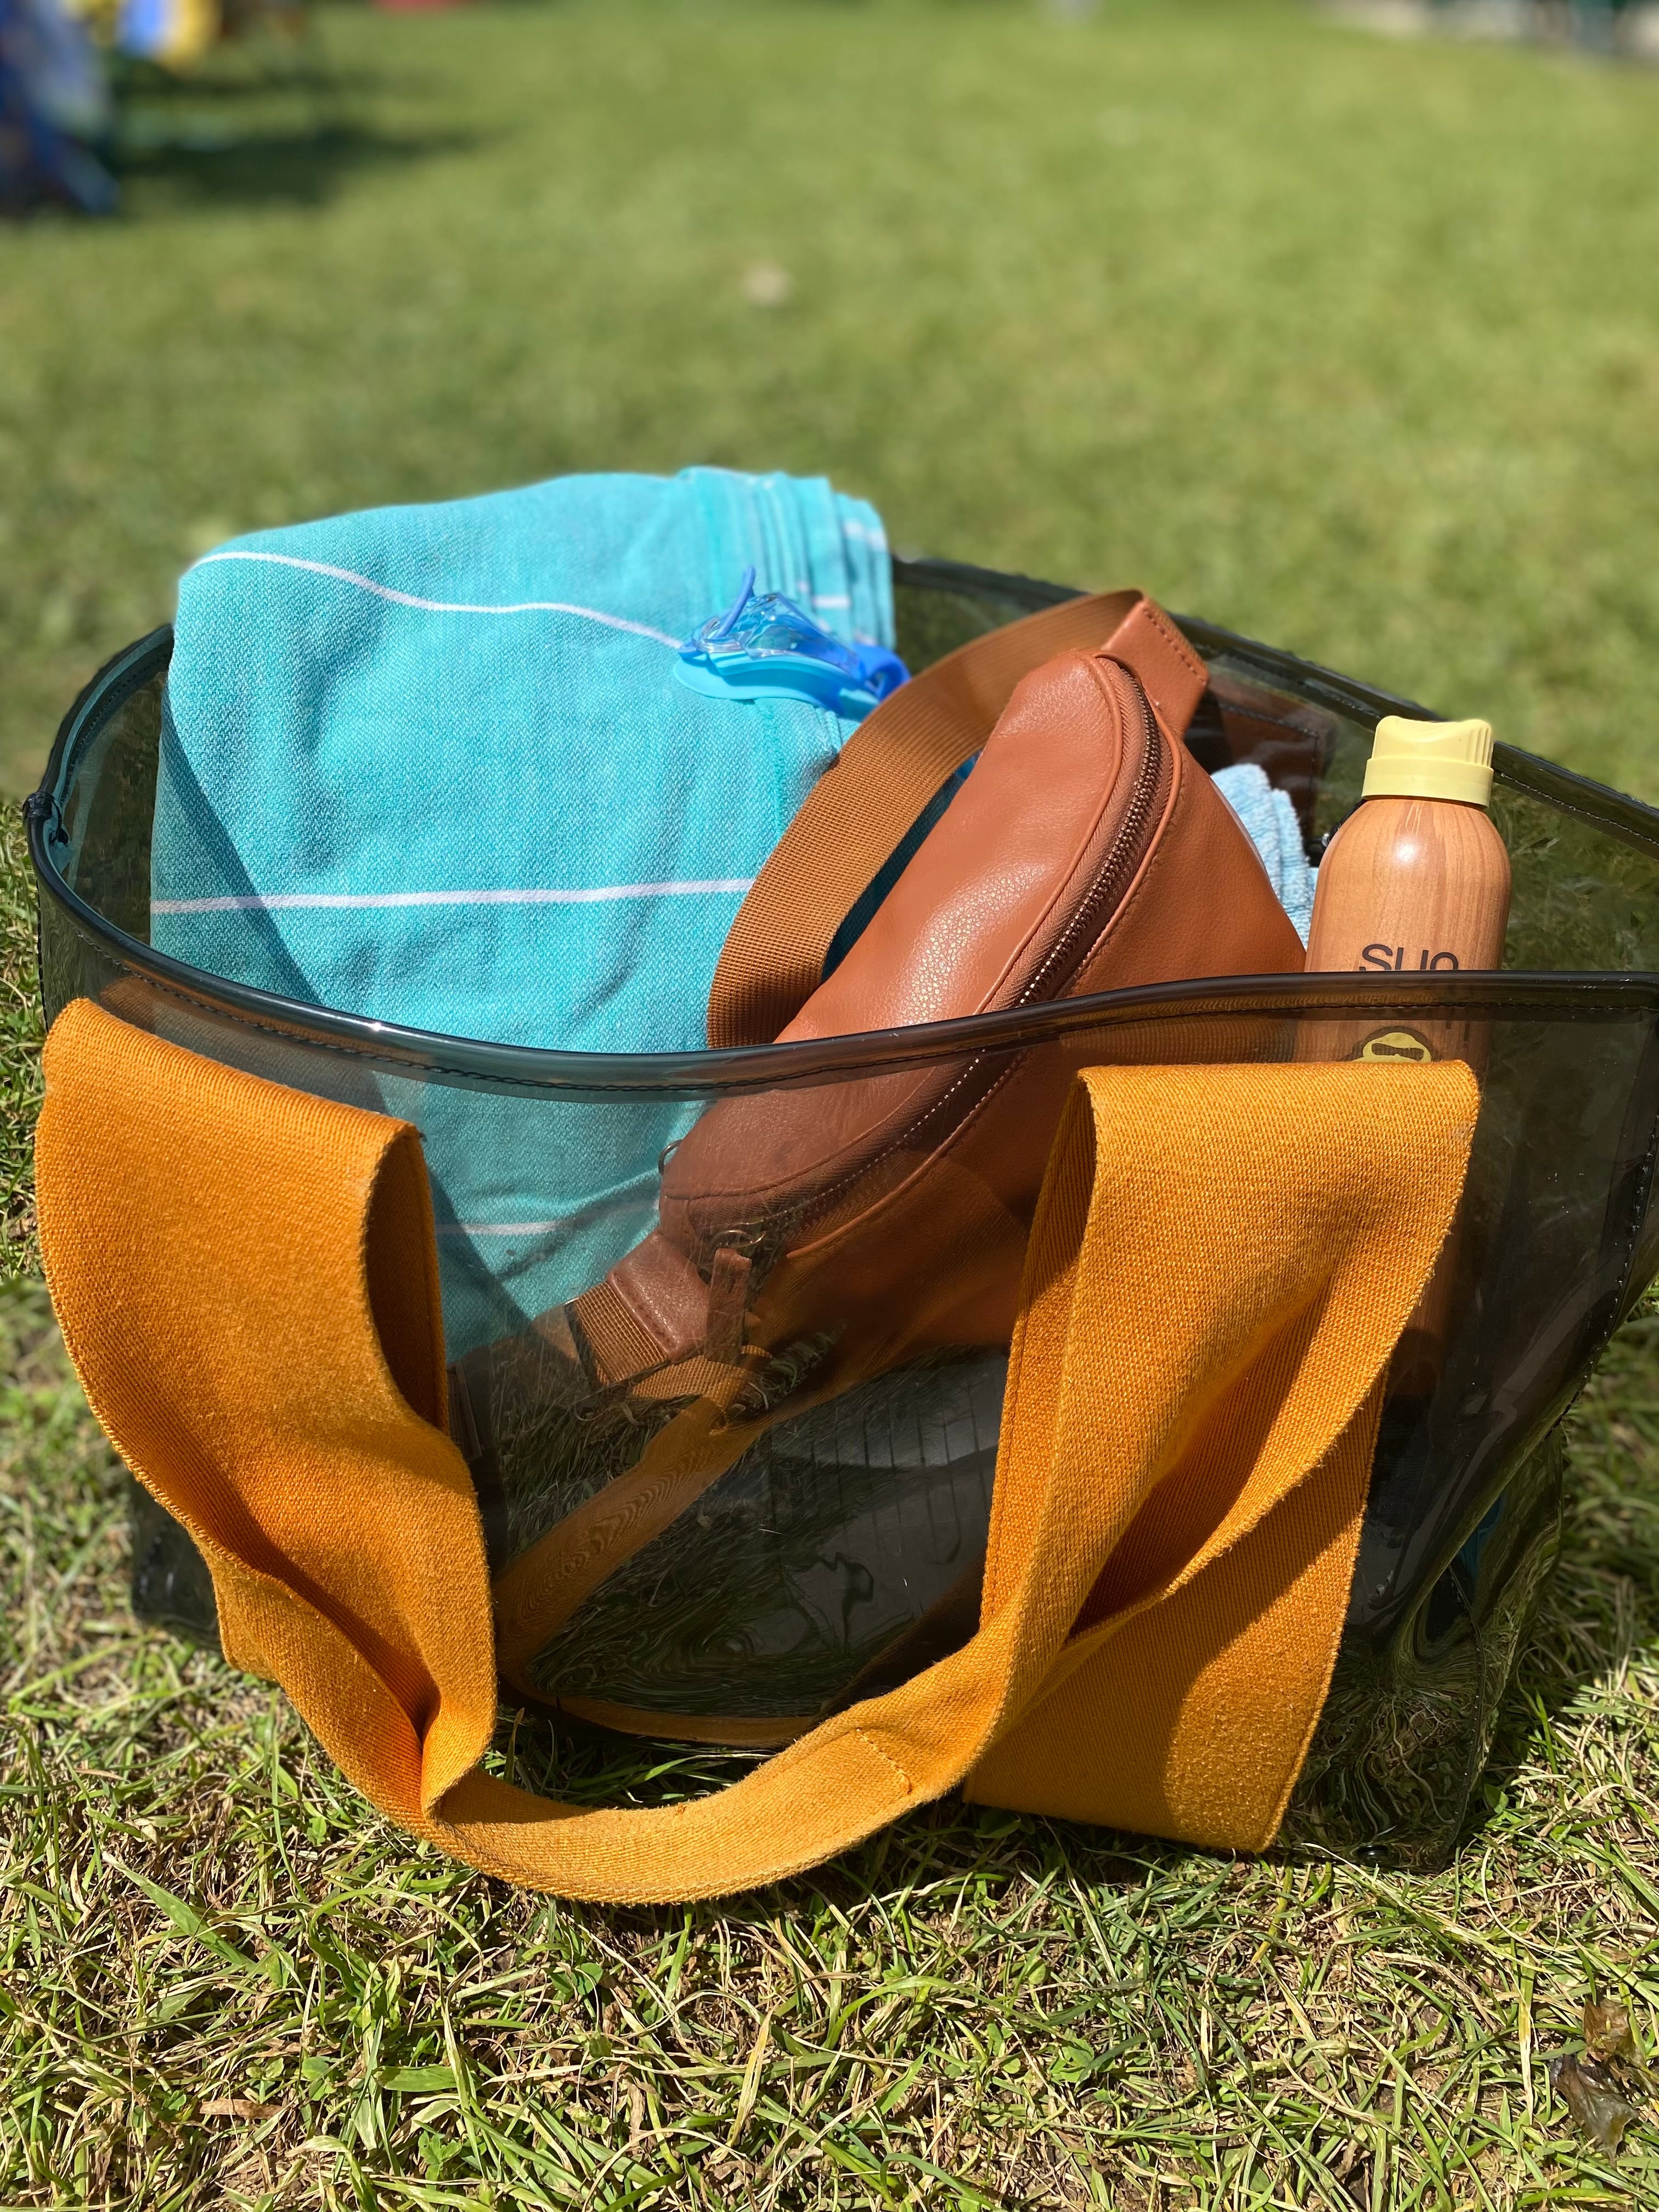 Kibou fanny back diaper bag inside beach bag for a pool day with kids